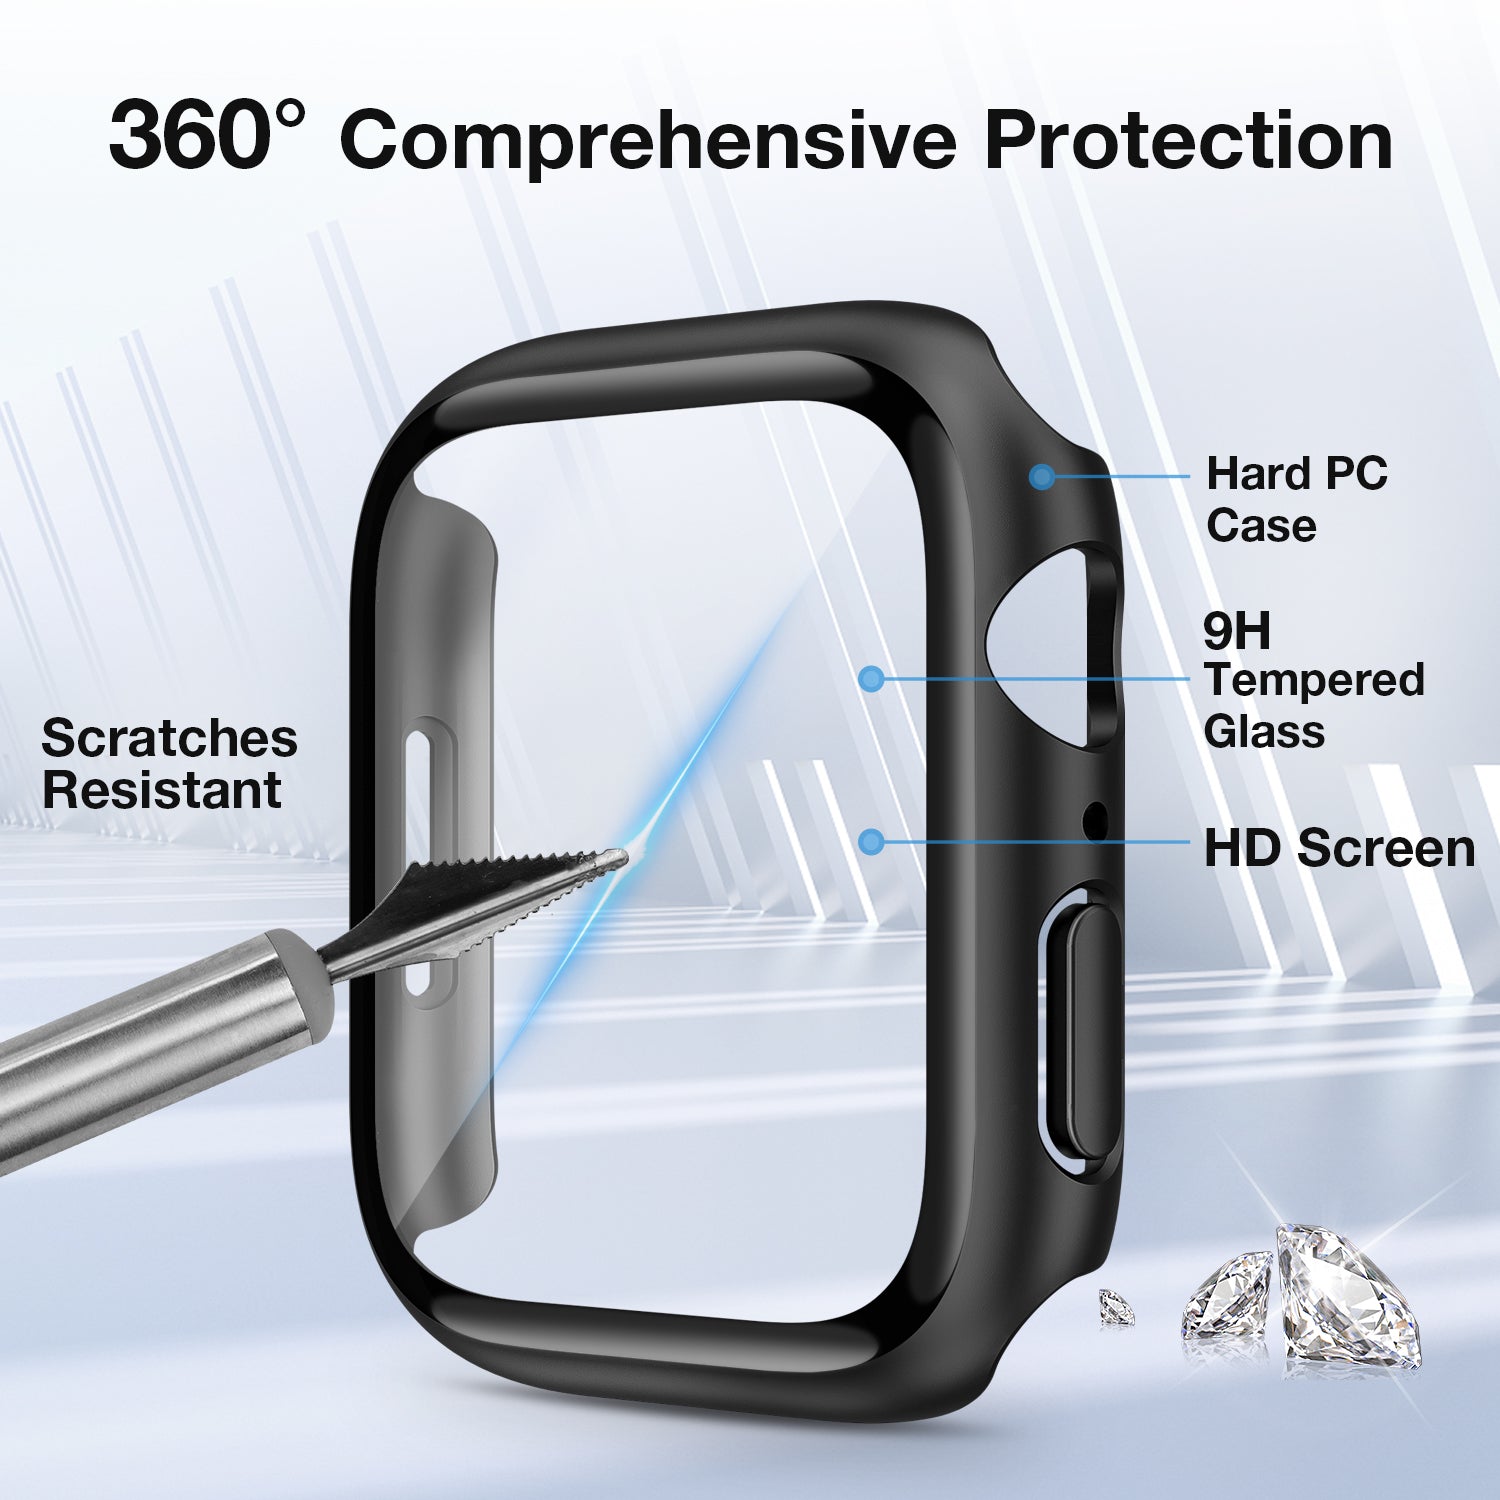 Tough On Apple Watch Case Series 6 / 5 / 4 / SE 40mm with Tempered Glass Screen Protector